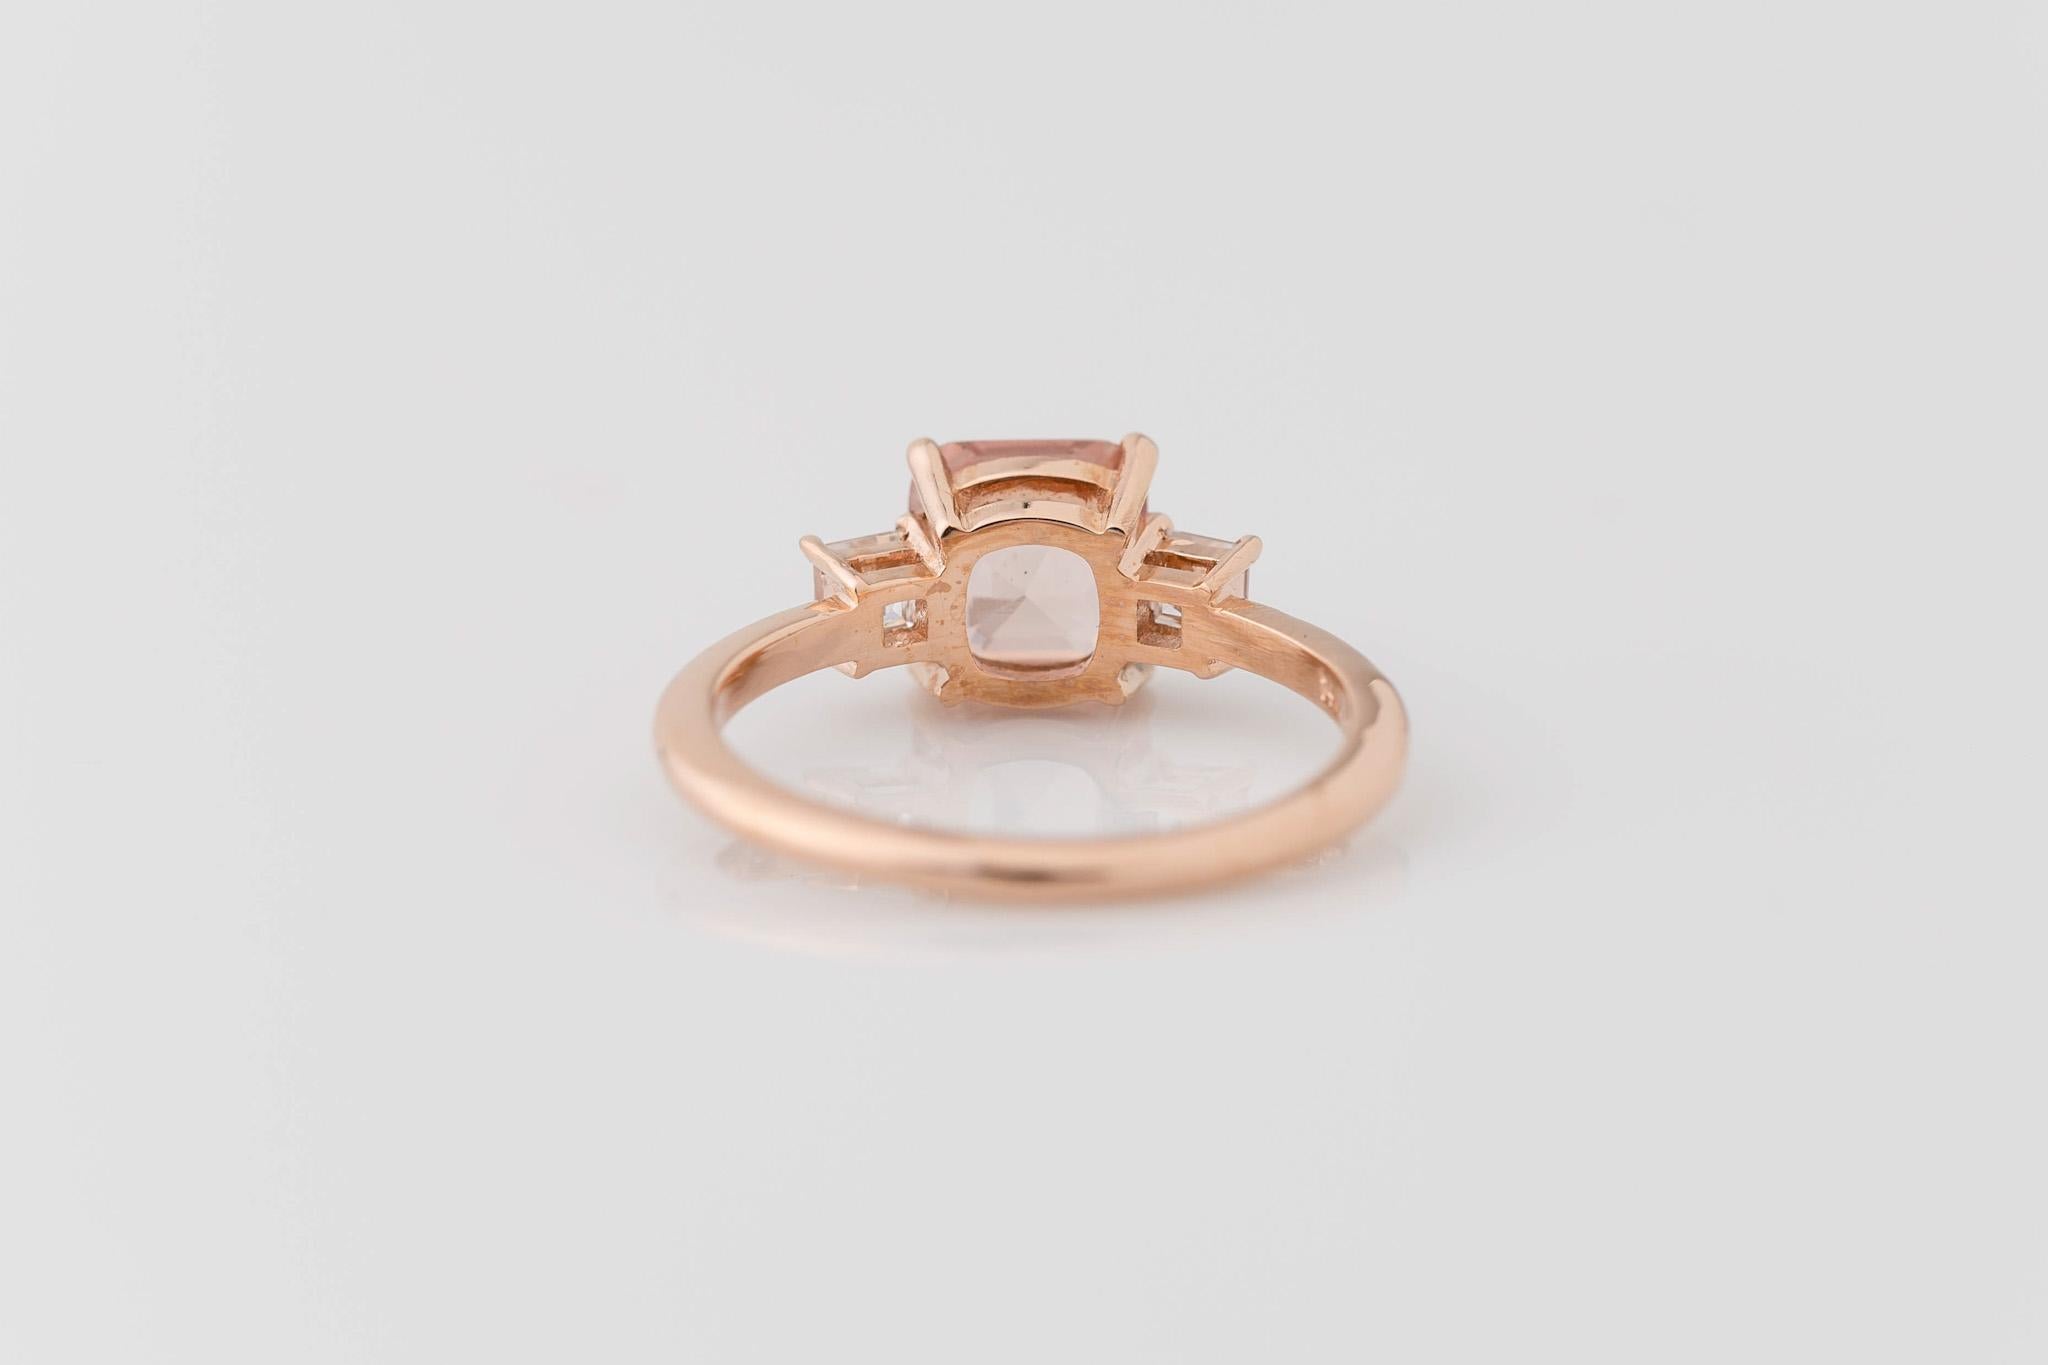 Dazzle with this elegantly understated GIA-certified 1.56-carat cushion-cut unheated Padparadscha sapphire diamond ring in 14k rose gold. The center stone boasts this rare sapphire's unmistakable captivating pinkish-orange hue reminiscent of a